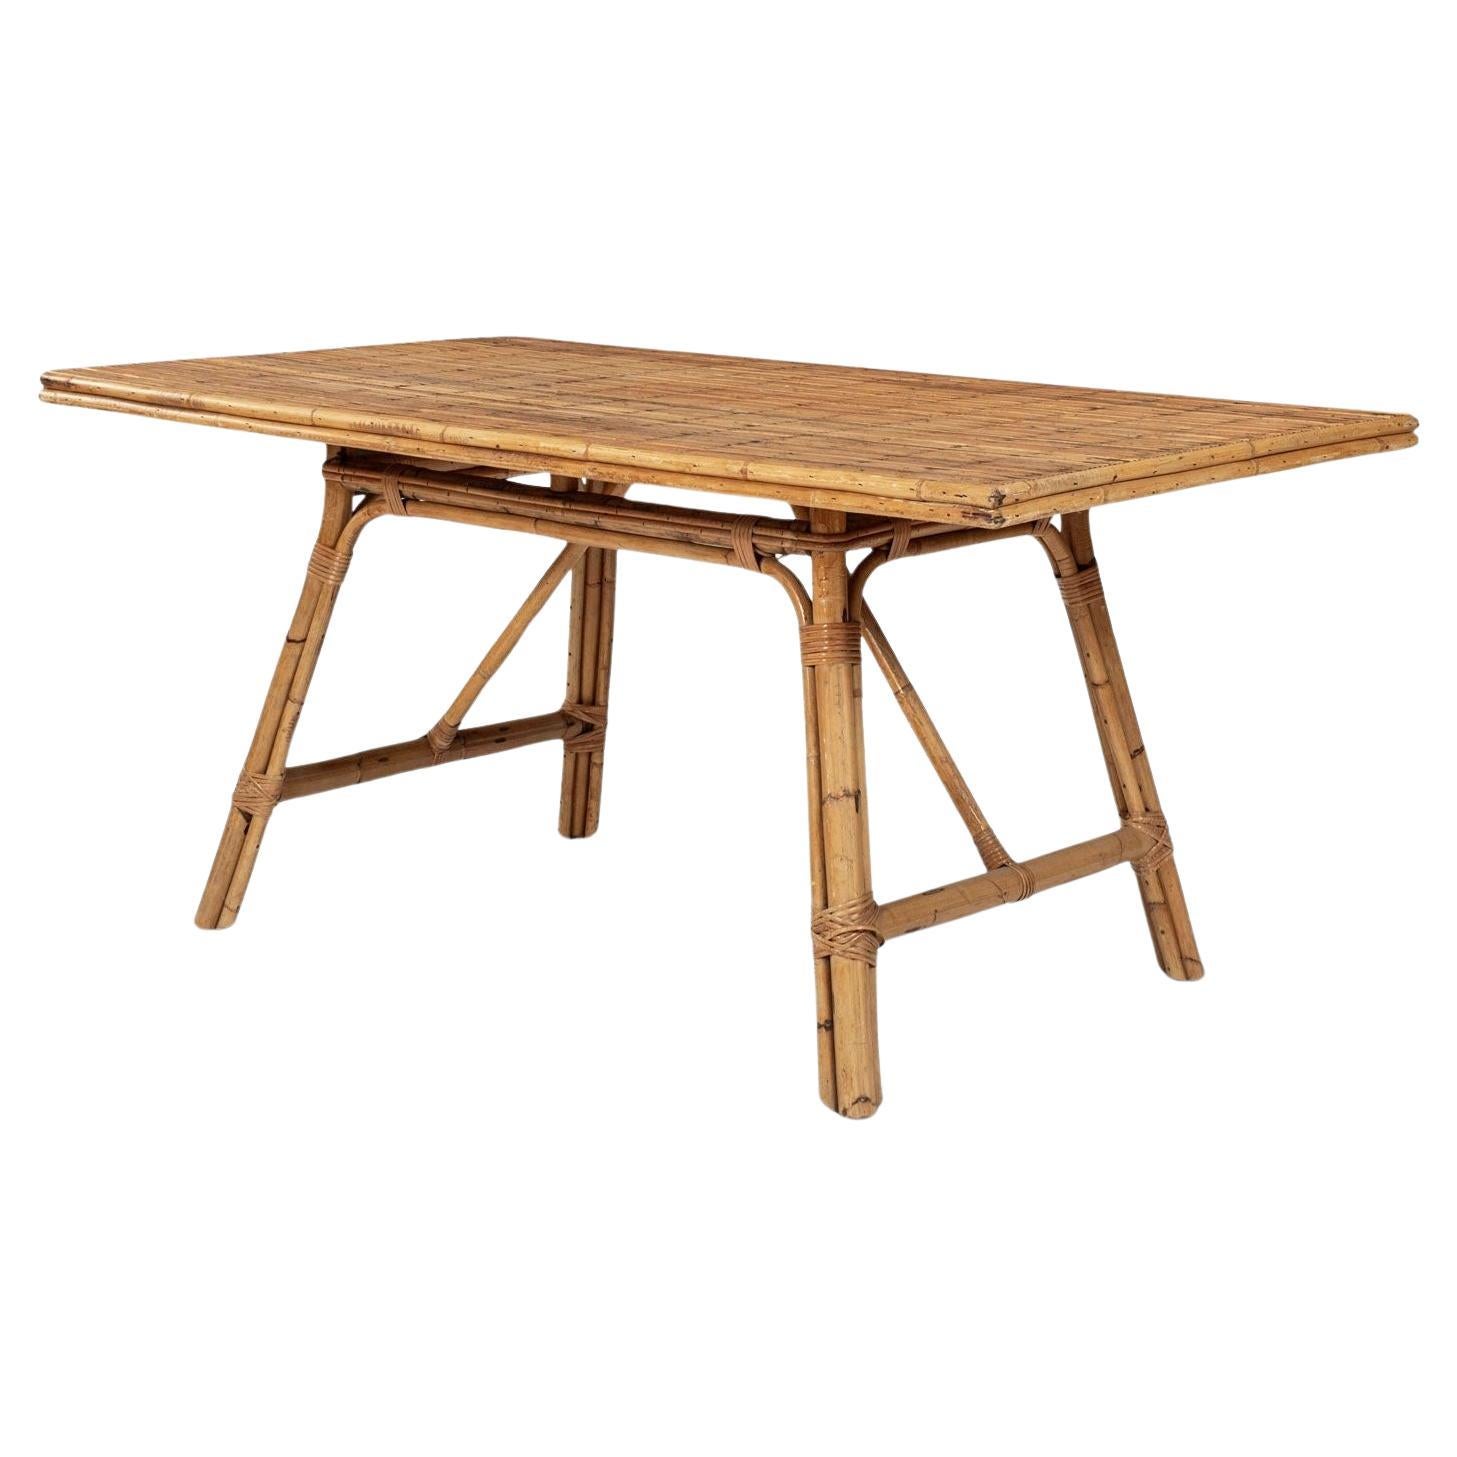 Rectangular-Shaped Top Rattan Dining Table For Sale